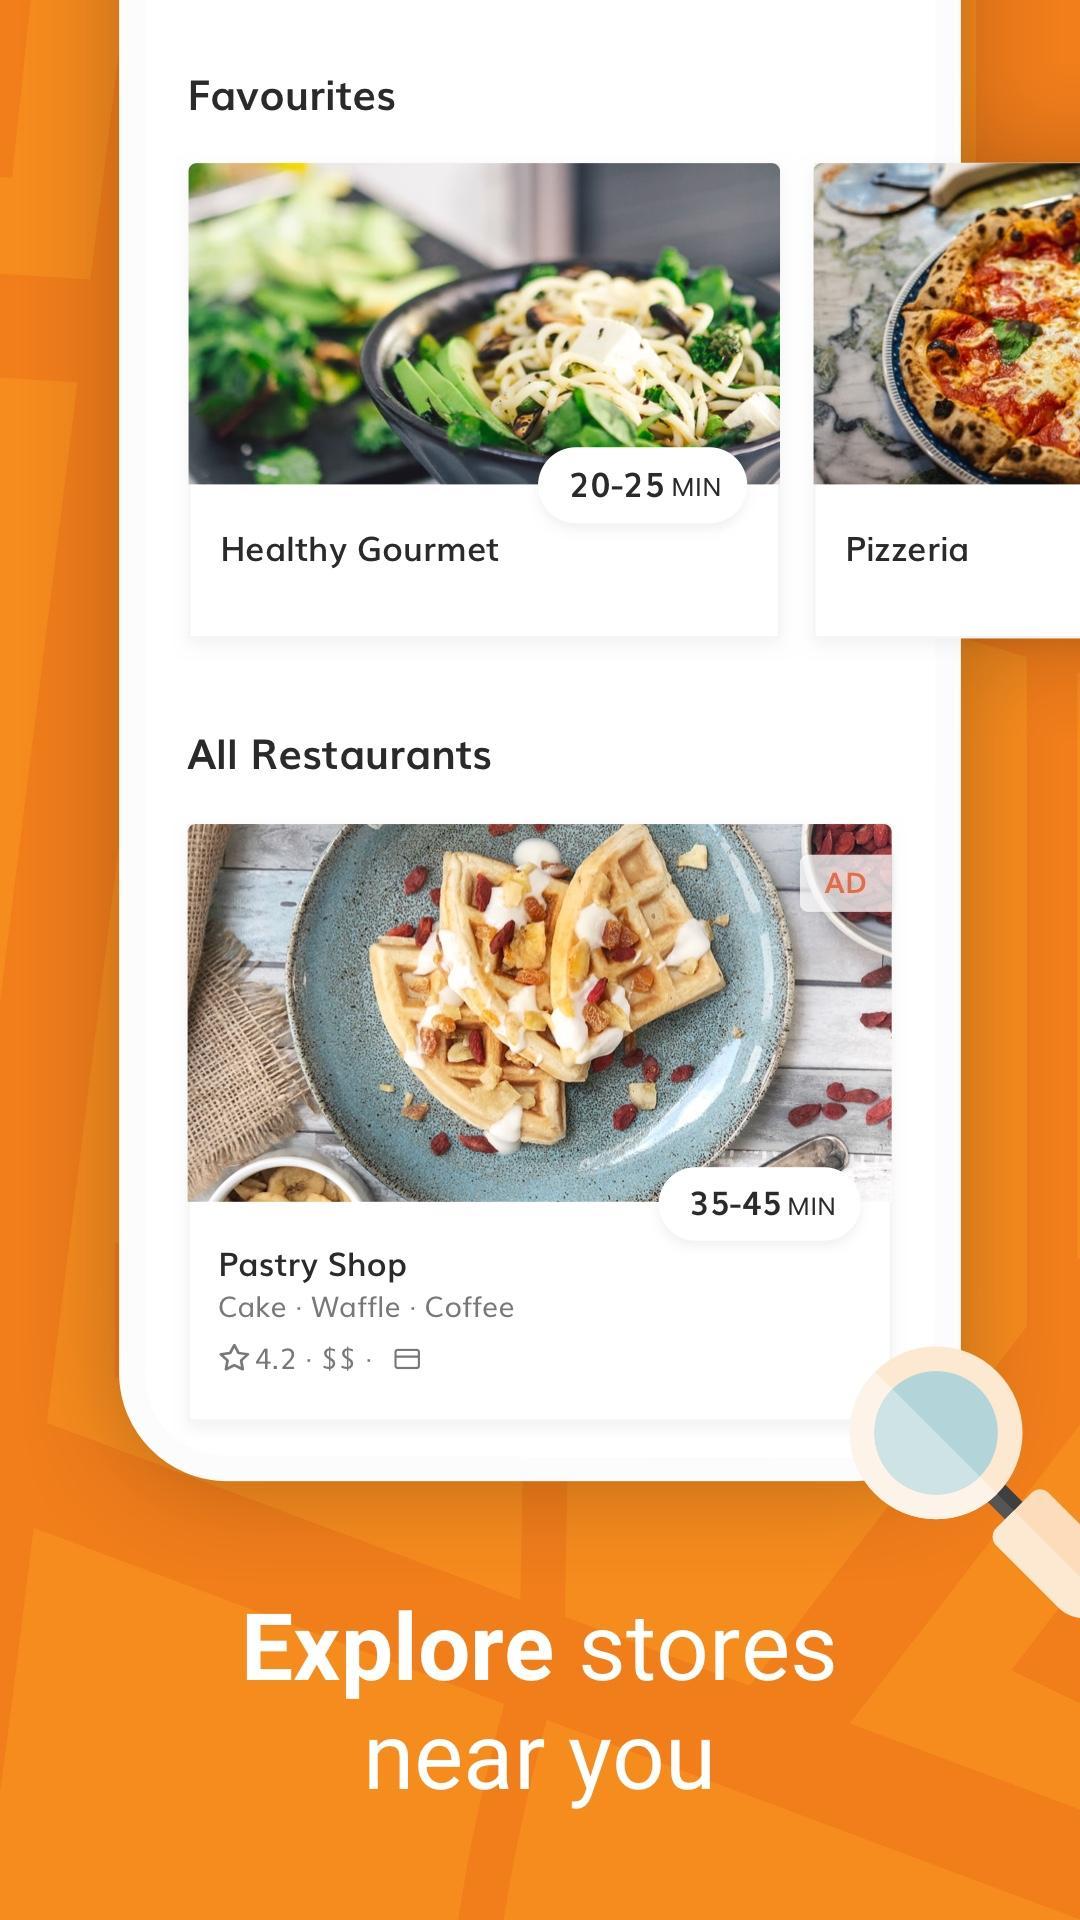 Jumia Food: Local Food Delivery near You